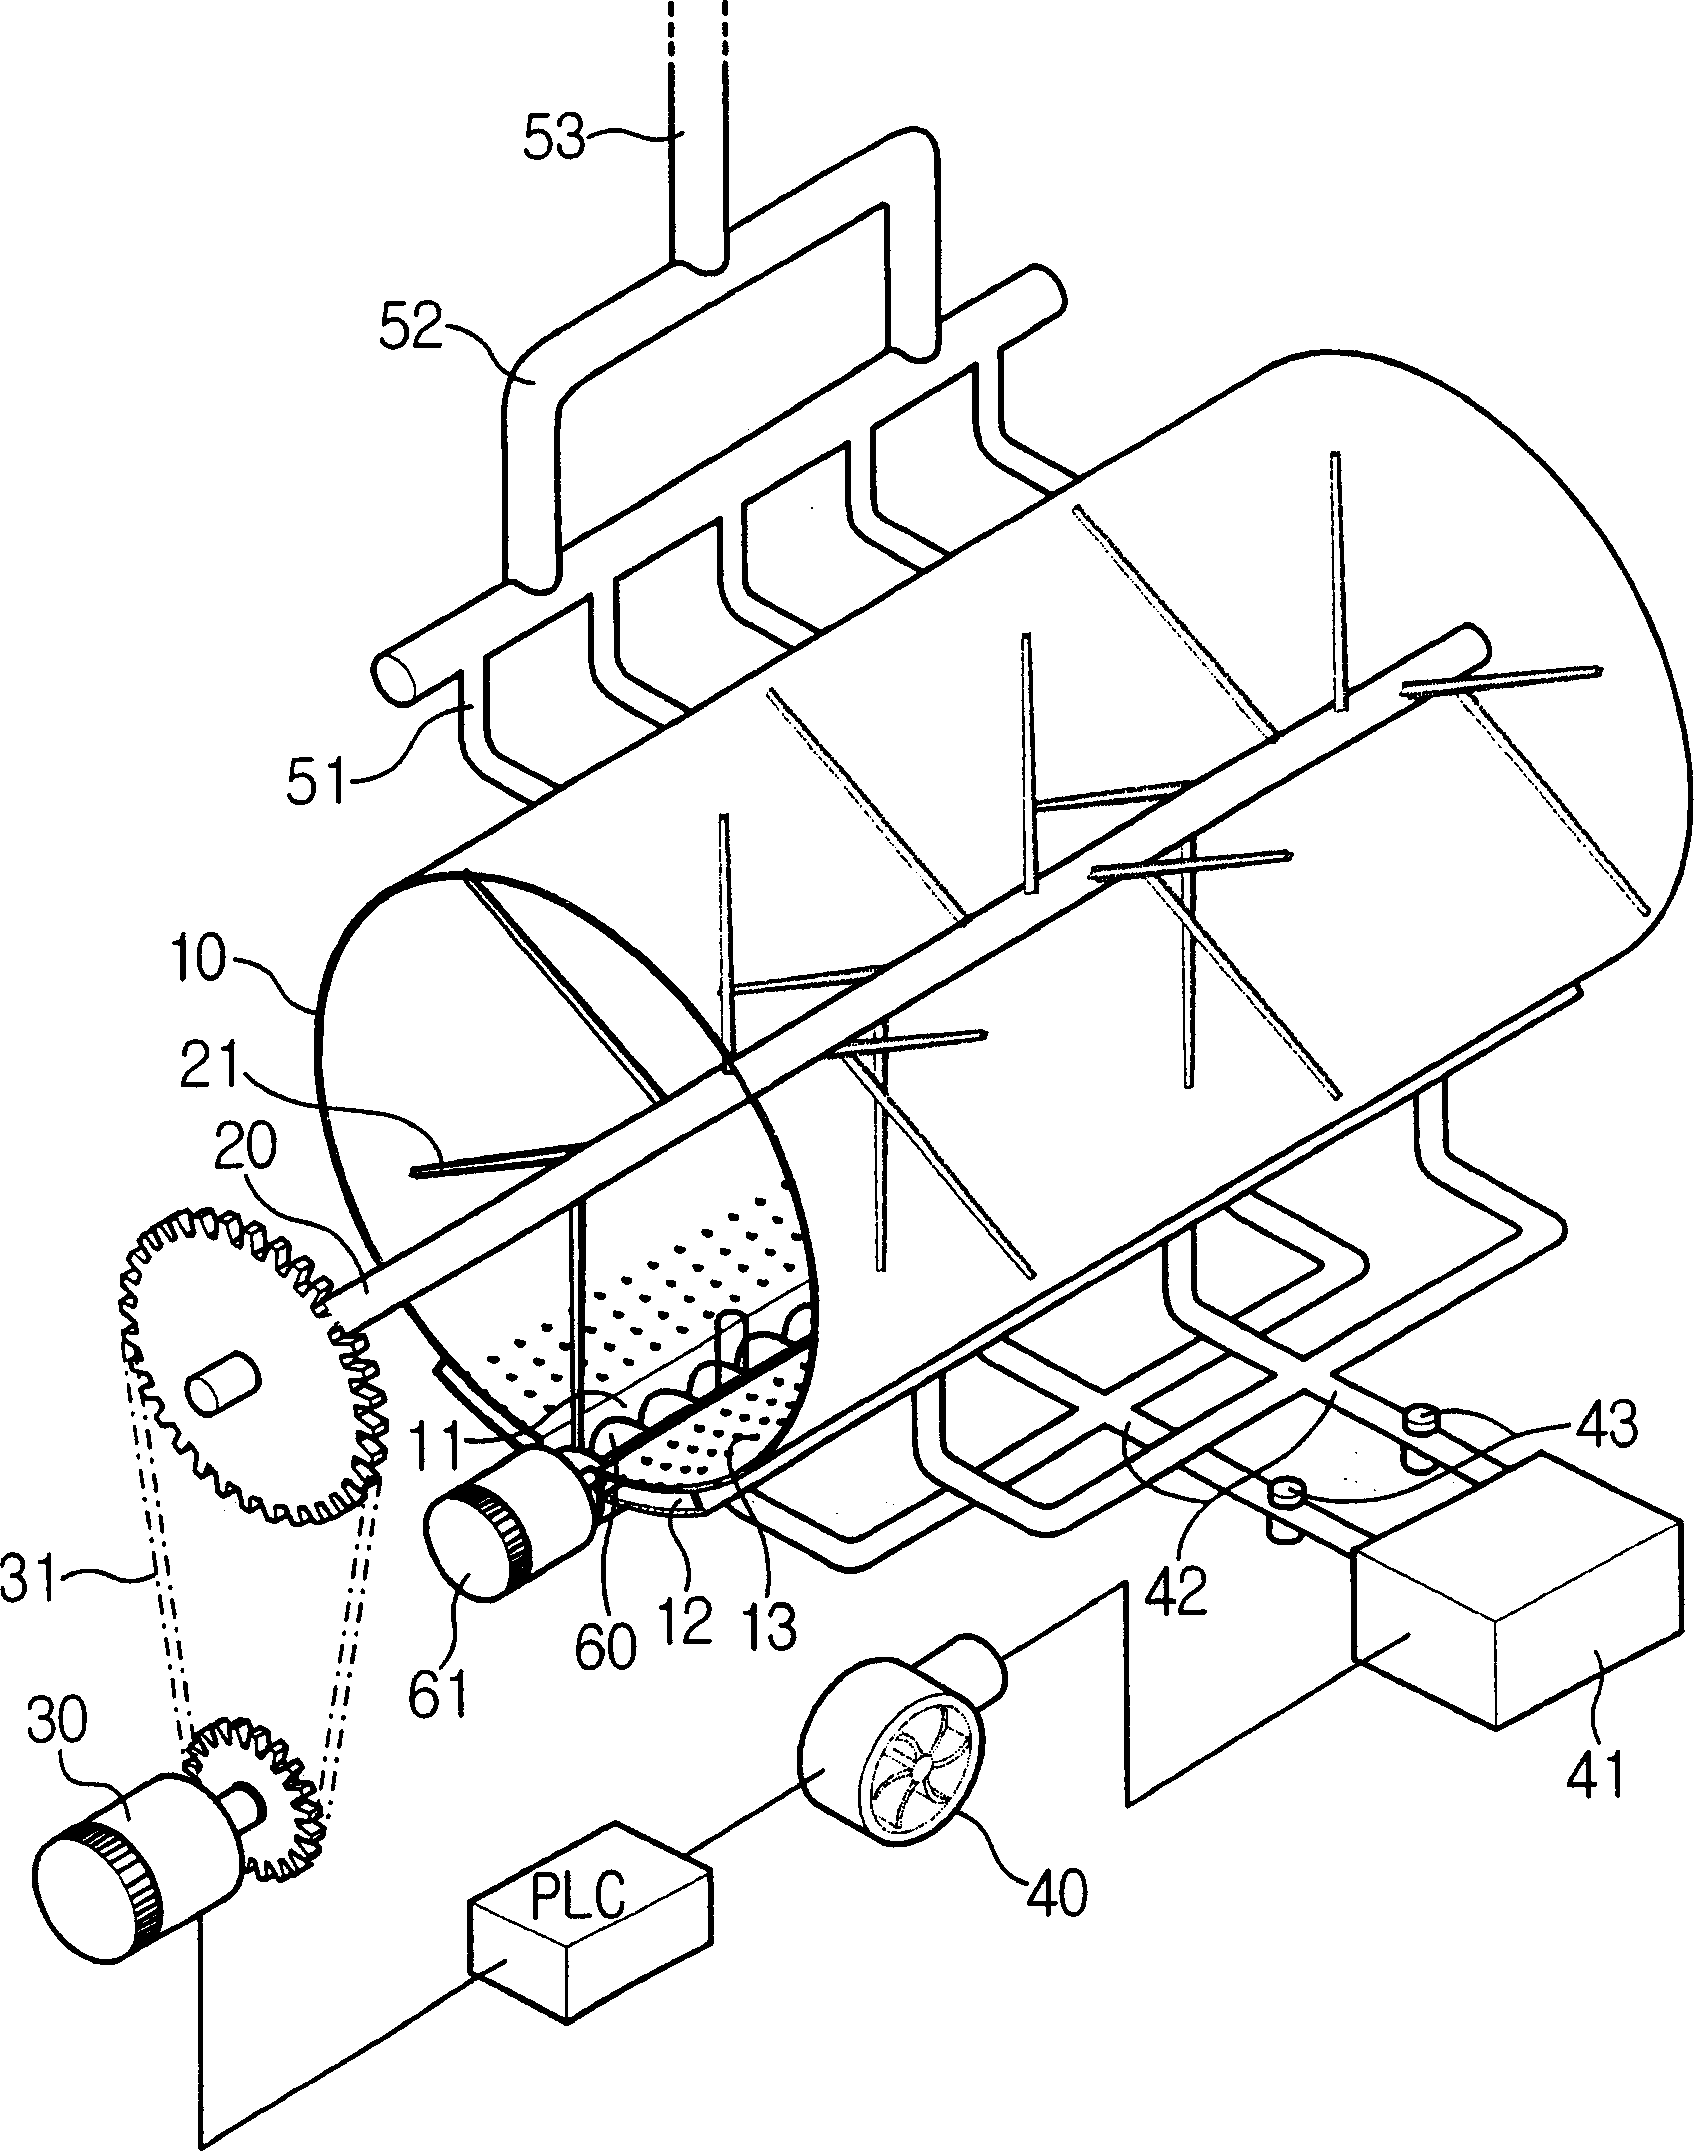 High-speed treating apparatus for organic waste